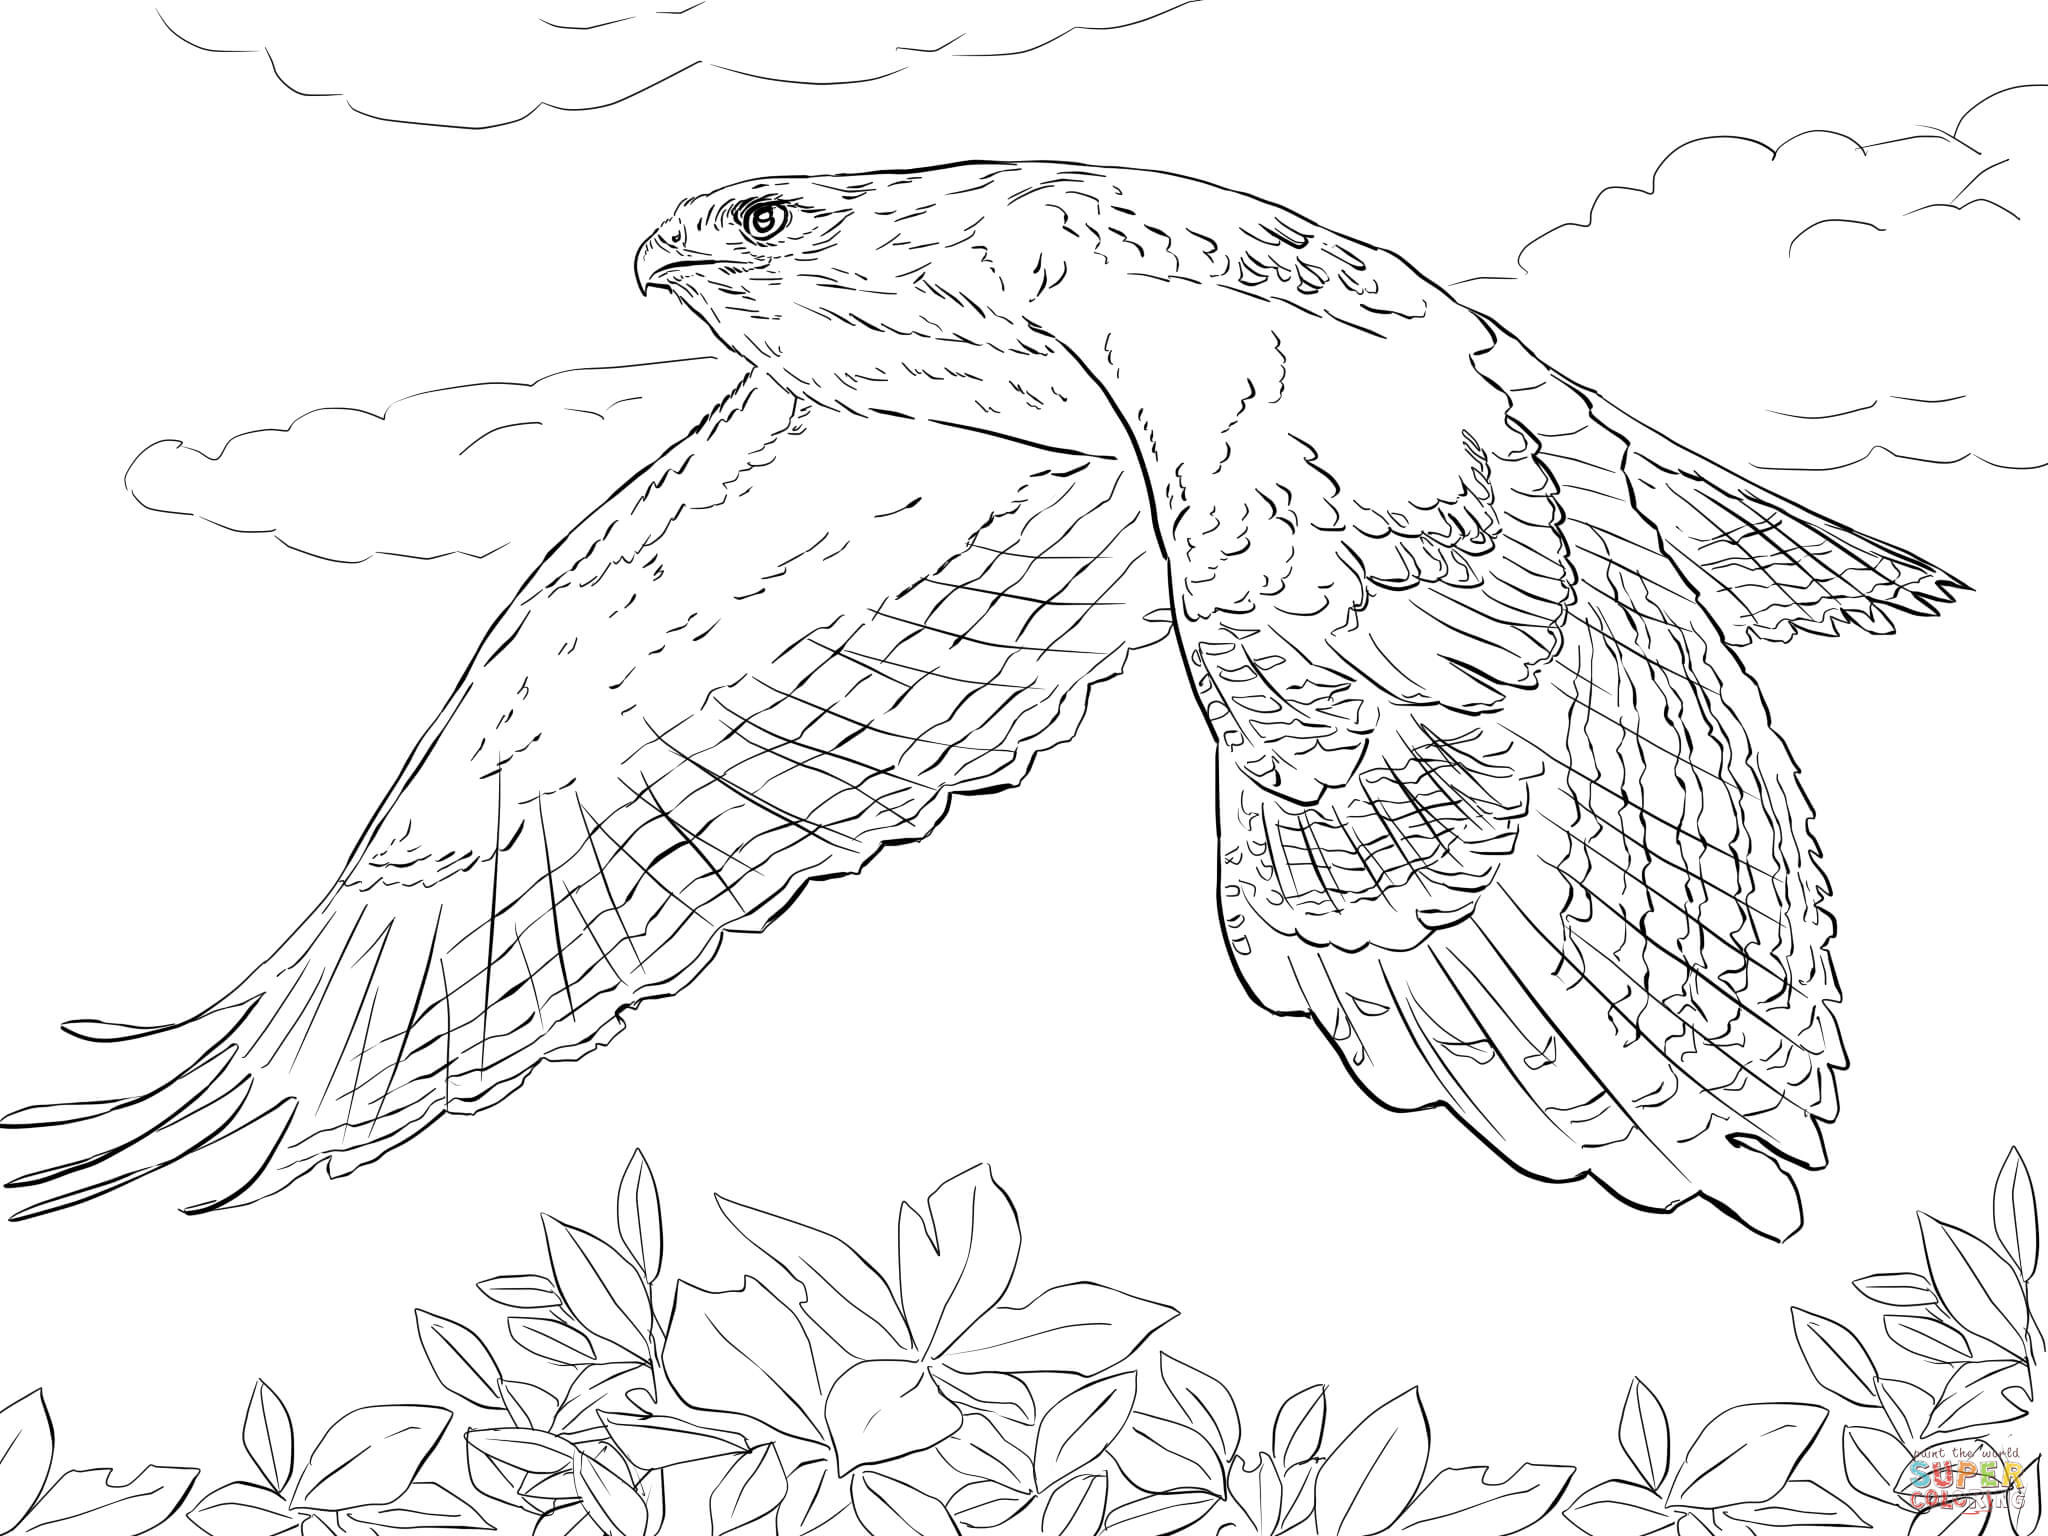 Coloring Sheets For Boys Hawk
 Red Tailed Hawk in Flight coloring page